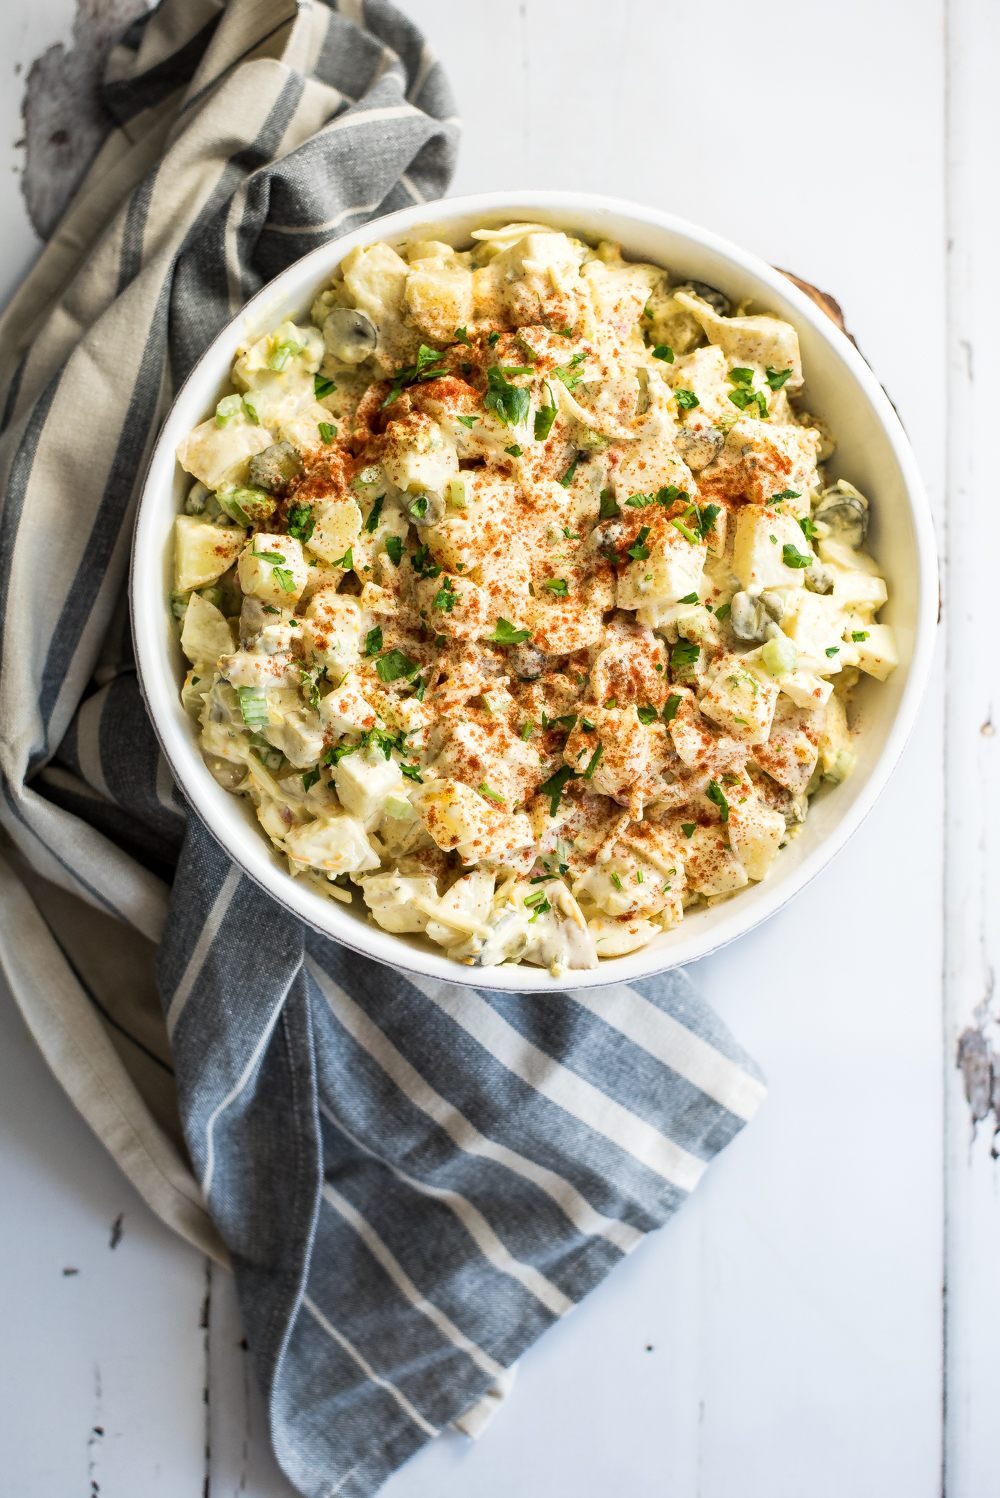 This sweet pickle pimento cheese potato salad is the perfect side dish for this summer's picnics and outdoor gatherings! Pair it with the perfect burger!